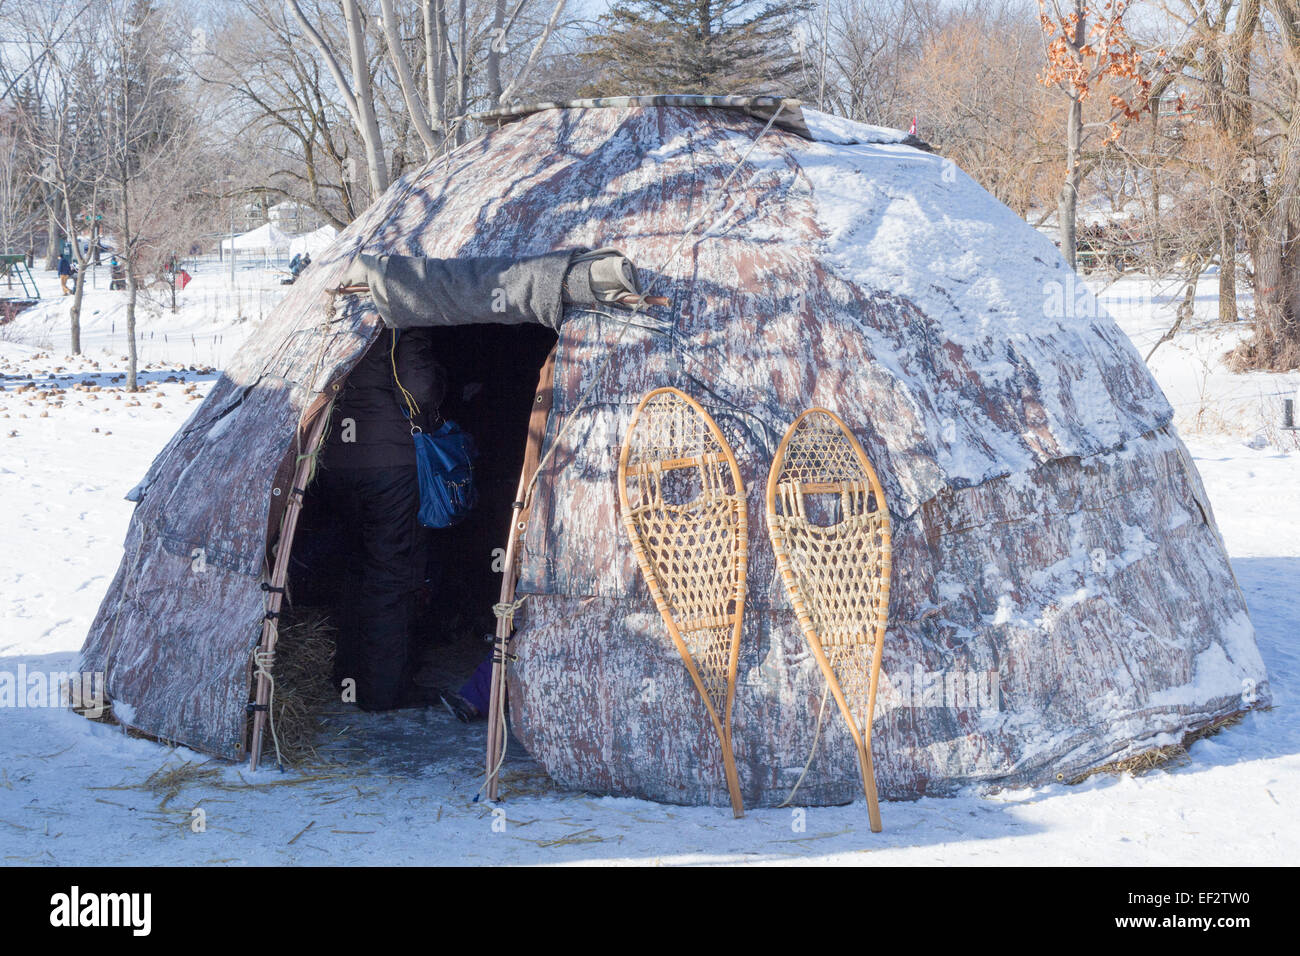 Wigwam at the Winter Festival in Cannington Ontario Stock Photo